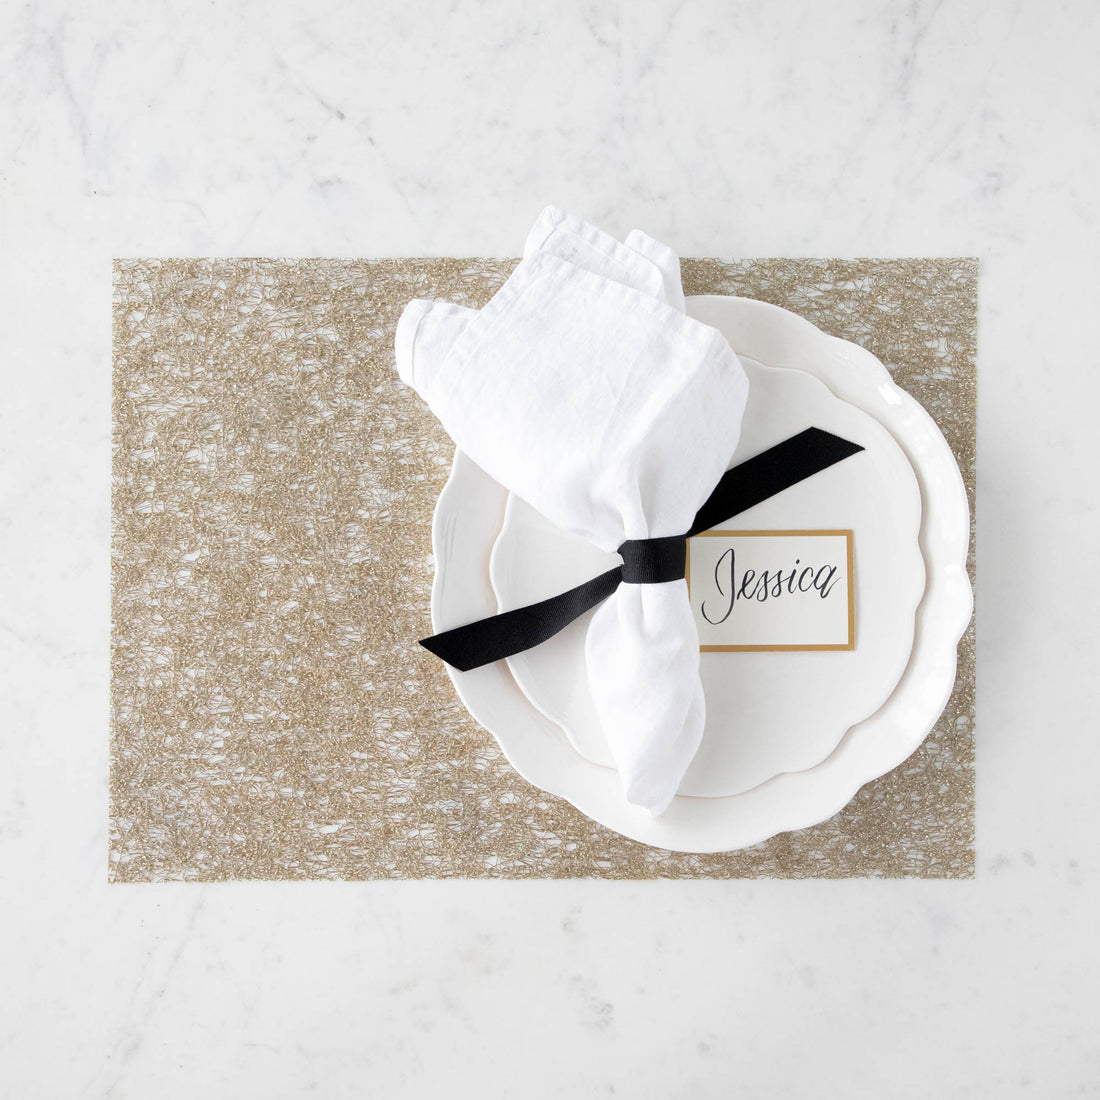 White napkin on a plate with a name card reading &quot;Jessica&quot; at a table setting on a glittery gold Chilewich Metallic Lace placemat.